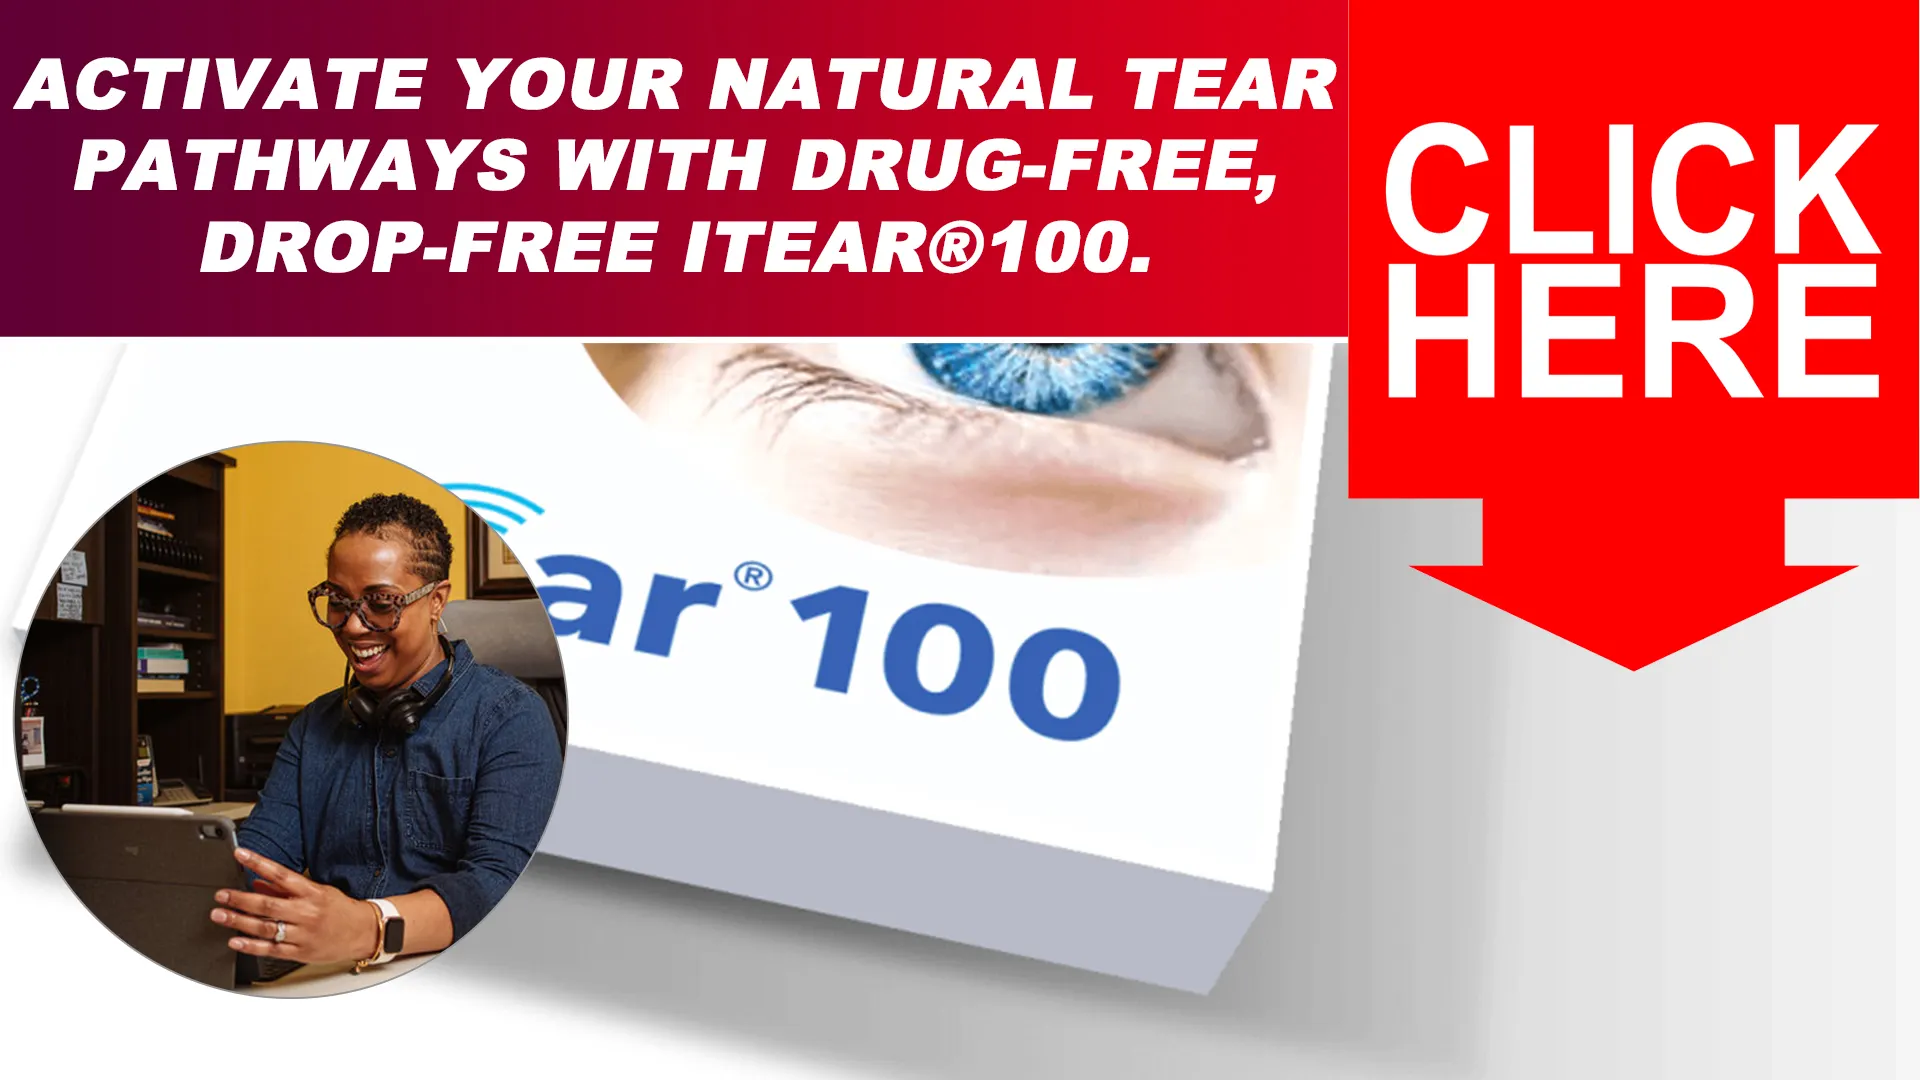 Simple Steps to Acquire the iTEAR100